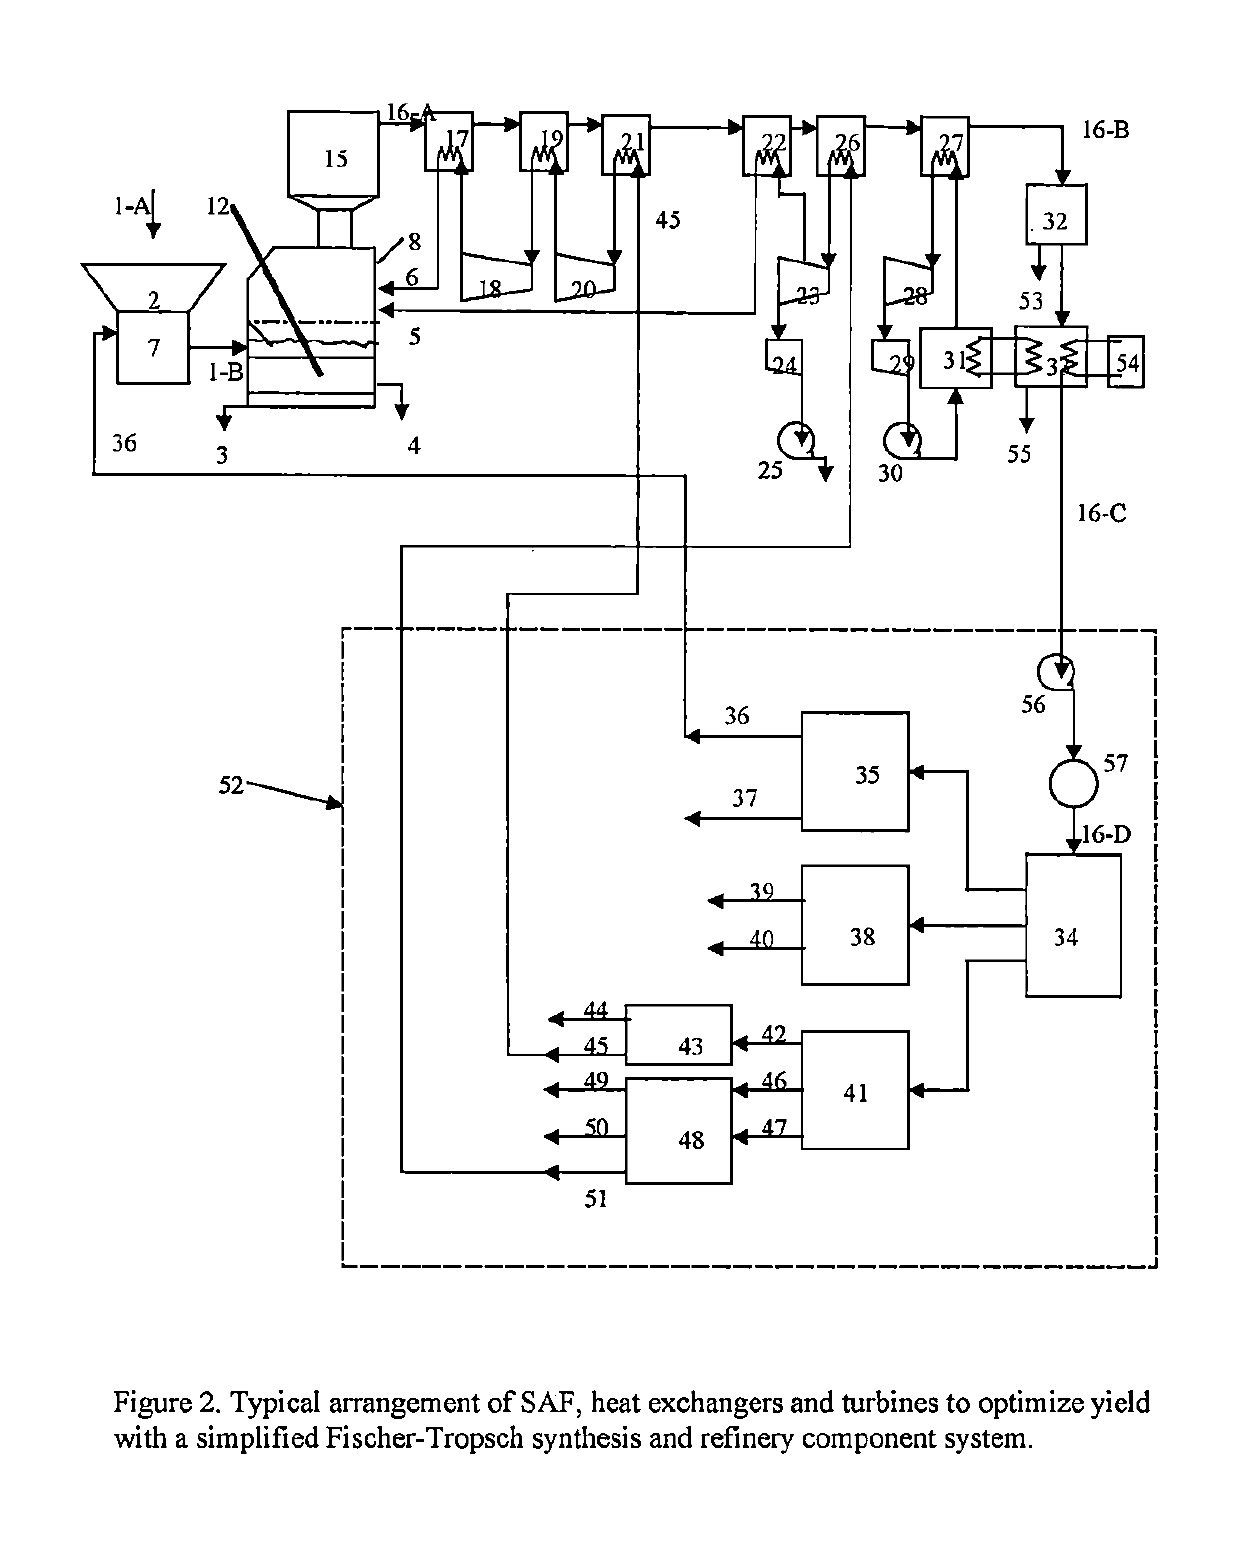 Coupling an electric furnace with a liquid fuel synthesis process to improve performance when processing heterogeneous wastes